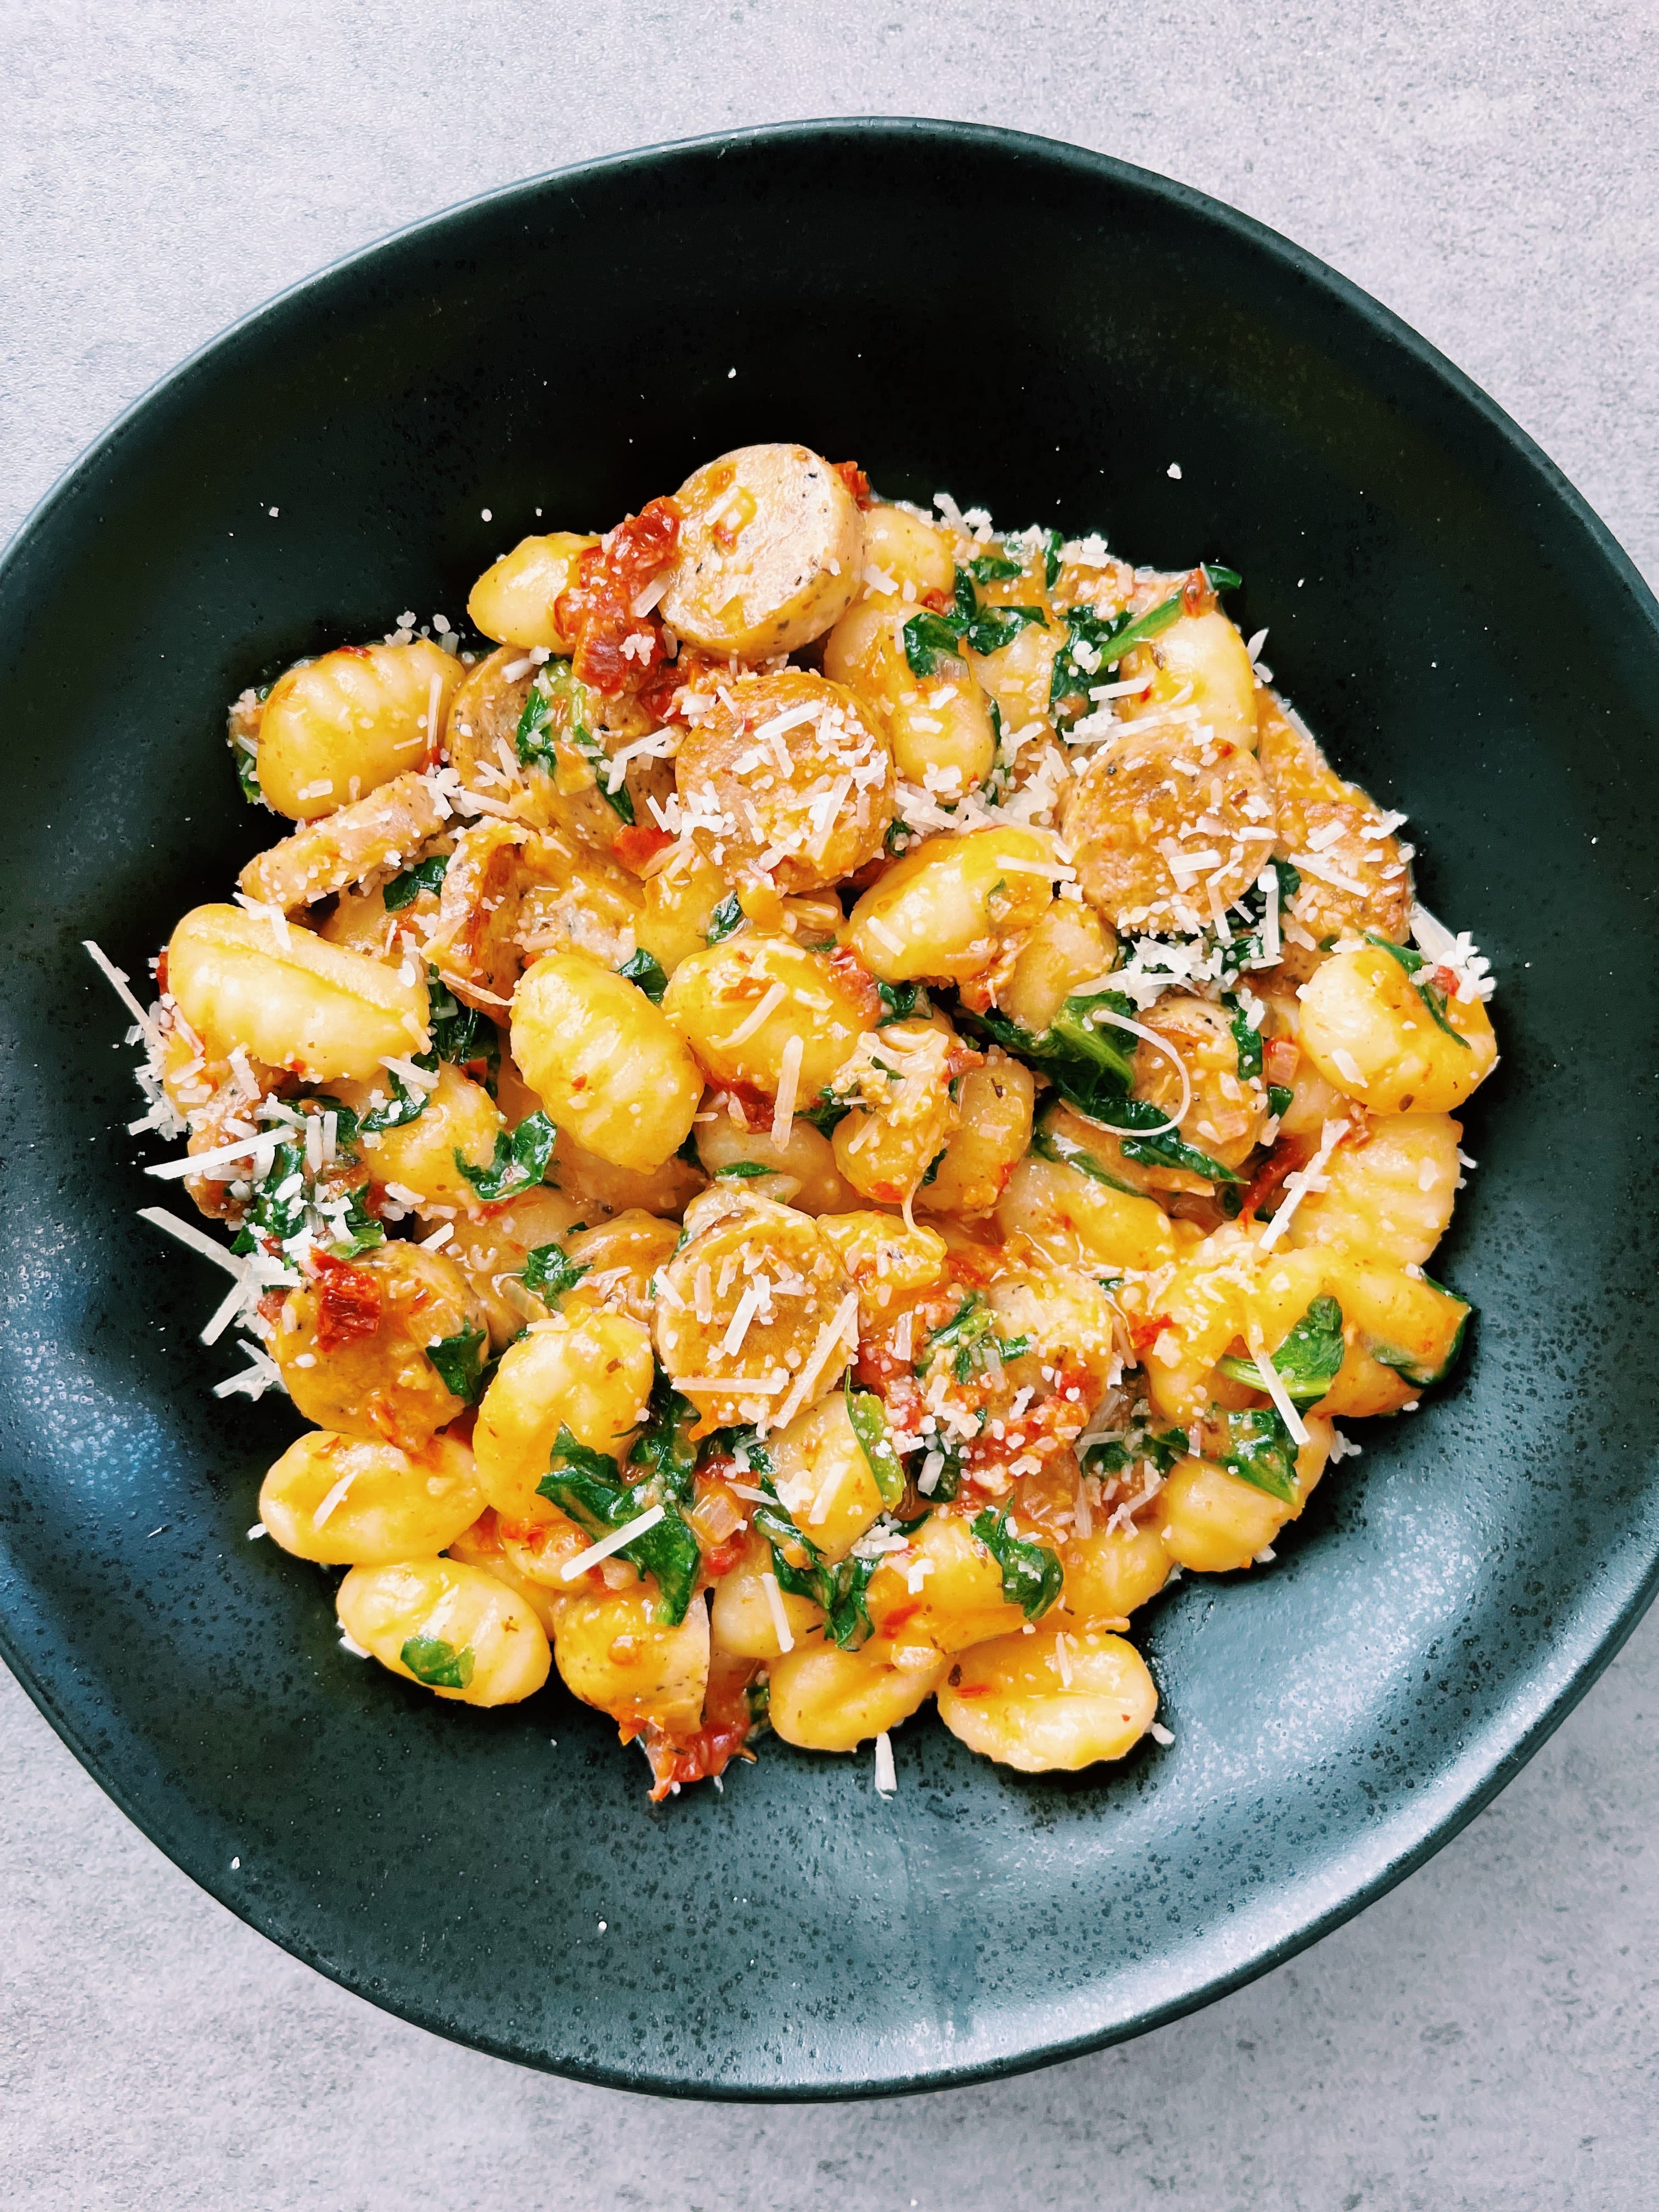 Spicy, Creamy Gnocchi with Chicken Sausage - Kelsey's Food Reviews